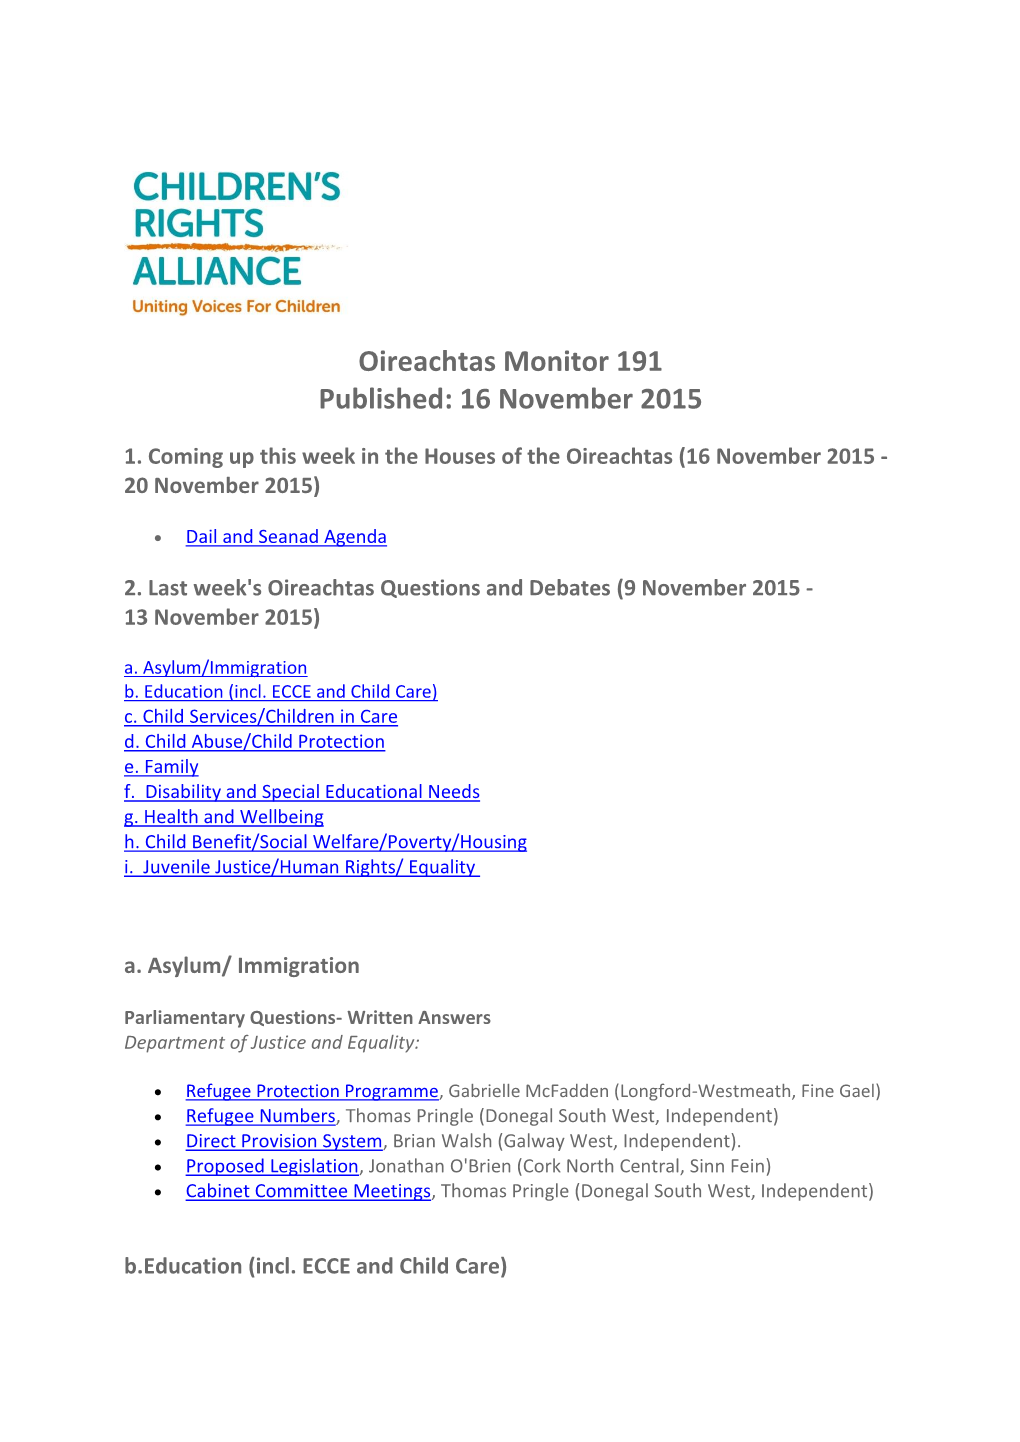 Oireachtas Monitor 191 Published: 16 November 2015